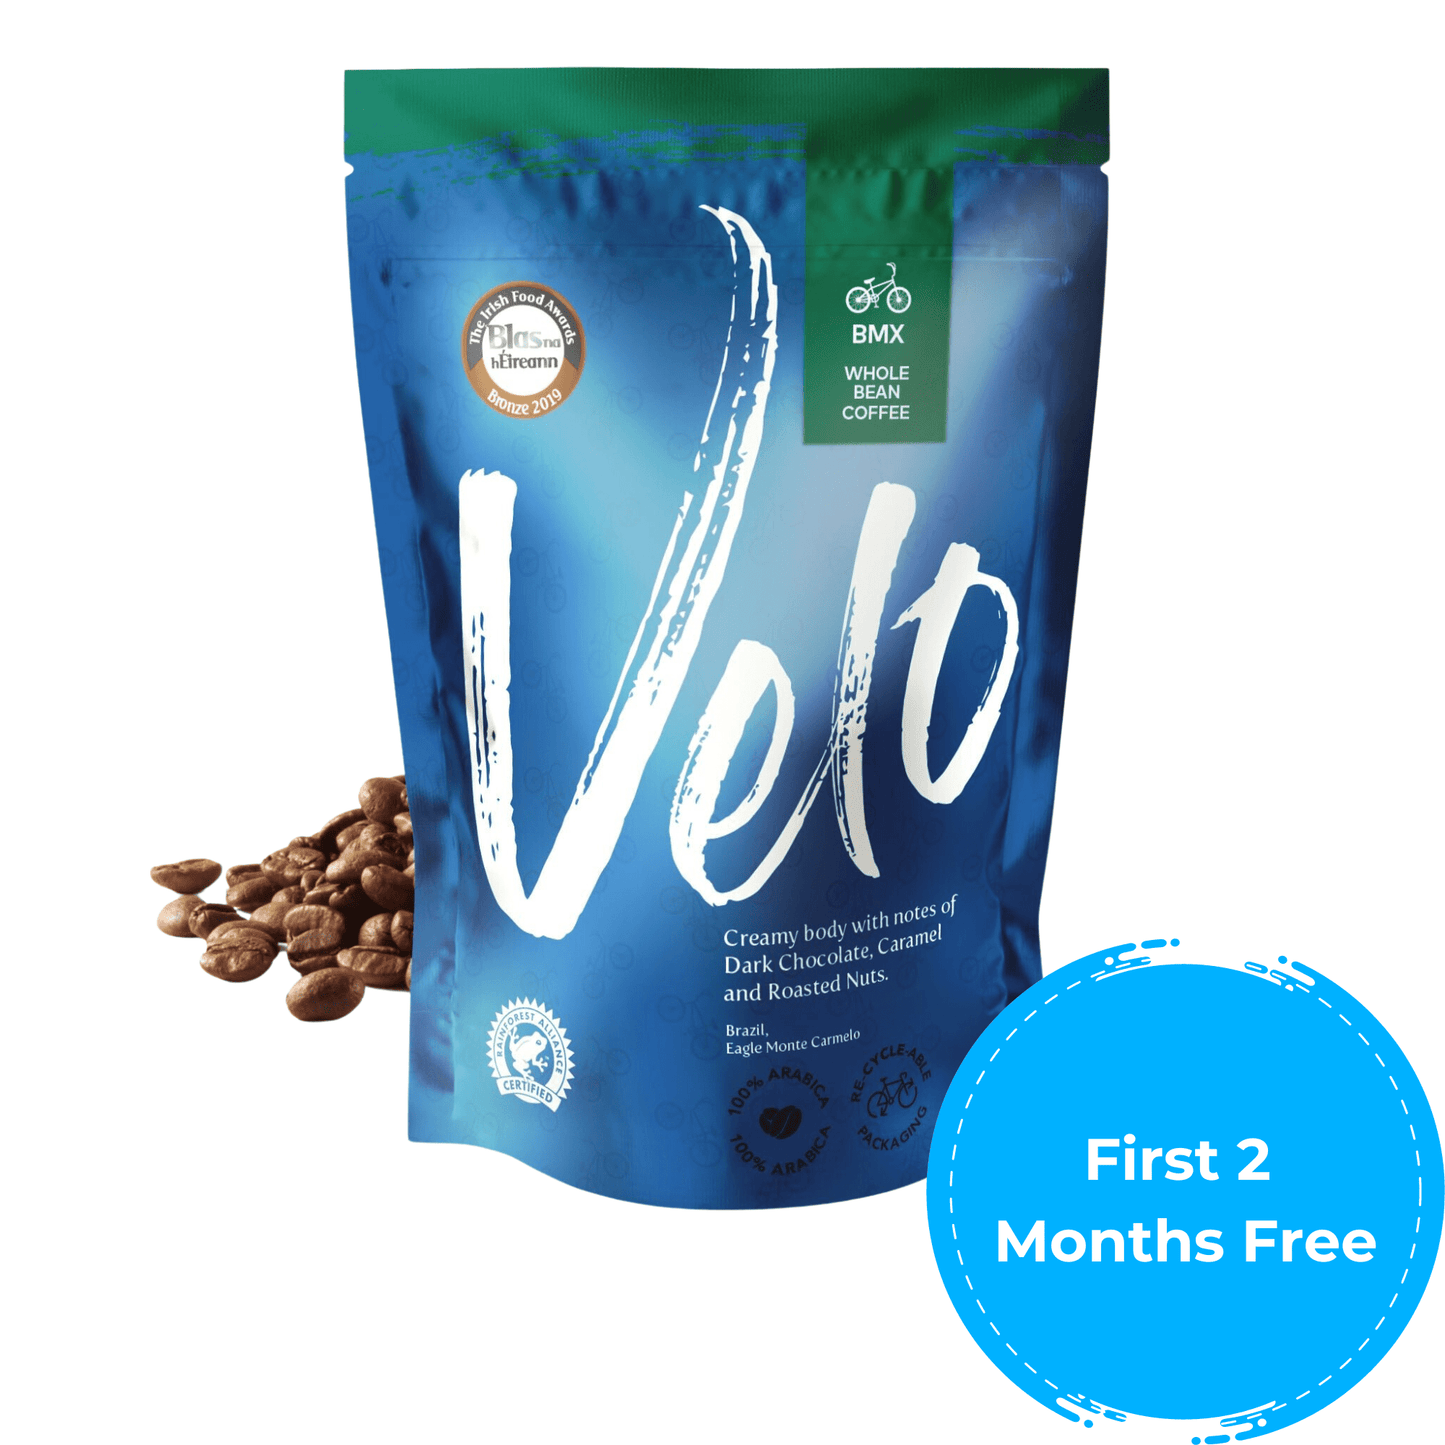 BMX 700g Coffee Bag Brazil - 12 Months Pre-Paid Subscription Blue and Green Bag - Circle First 2 Months Free Sticker  - Velo Coffee Roasters